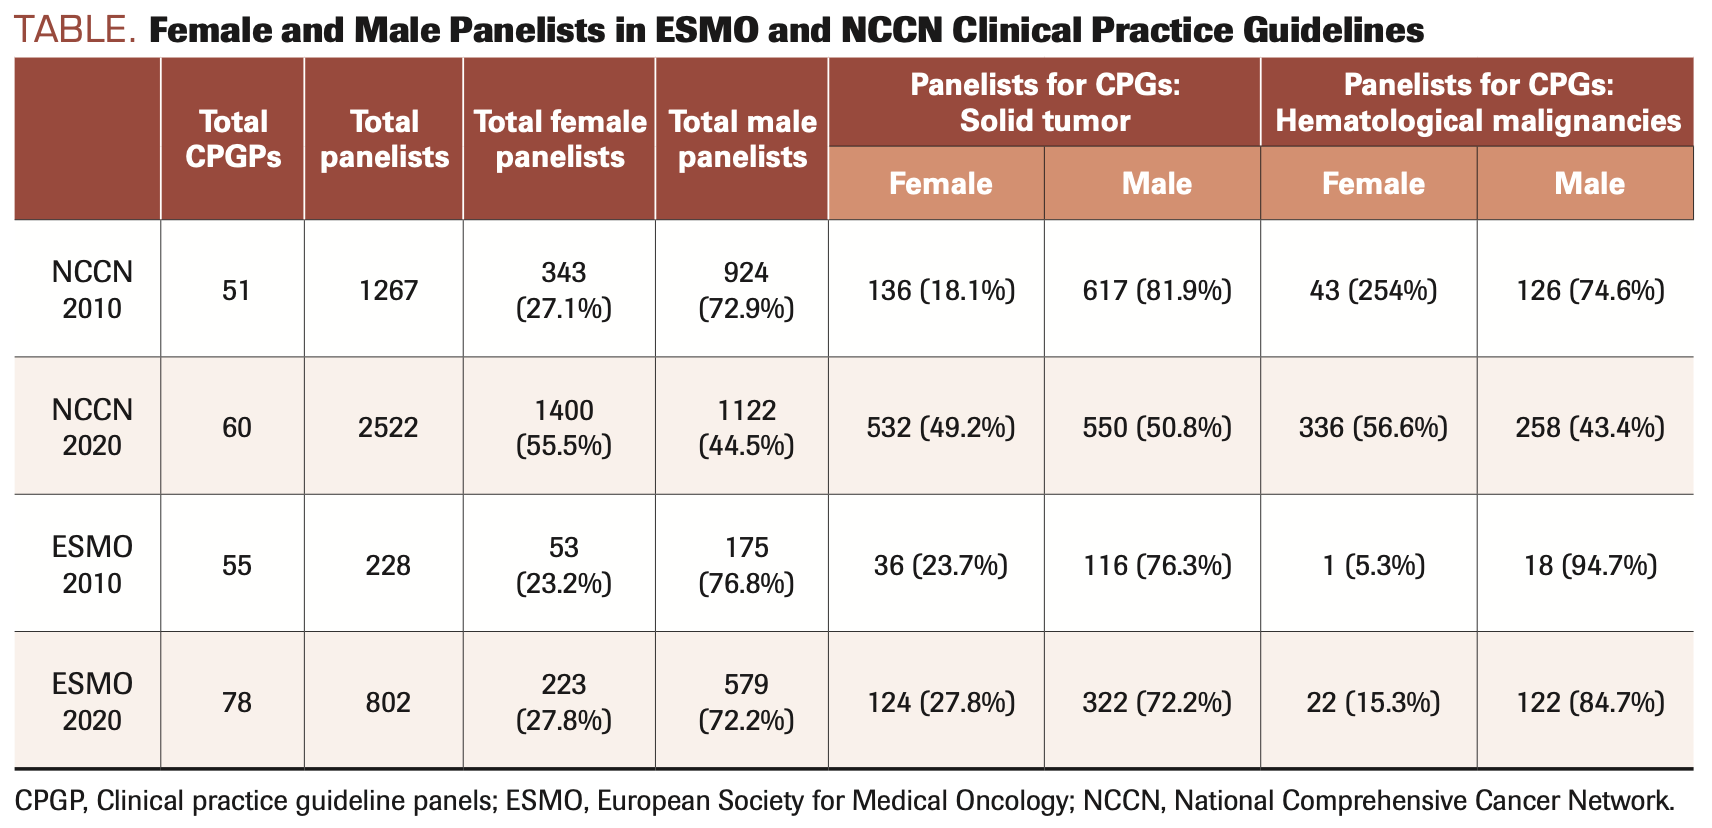 TABLE. Female and Male Panelists in ESMO and NCCN Clinical Practice Guidelines